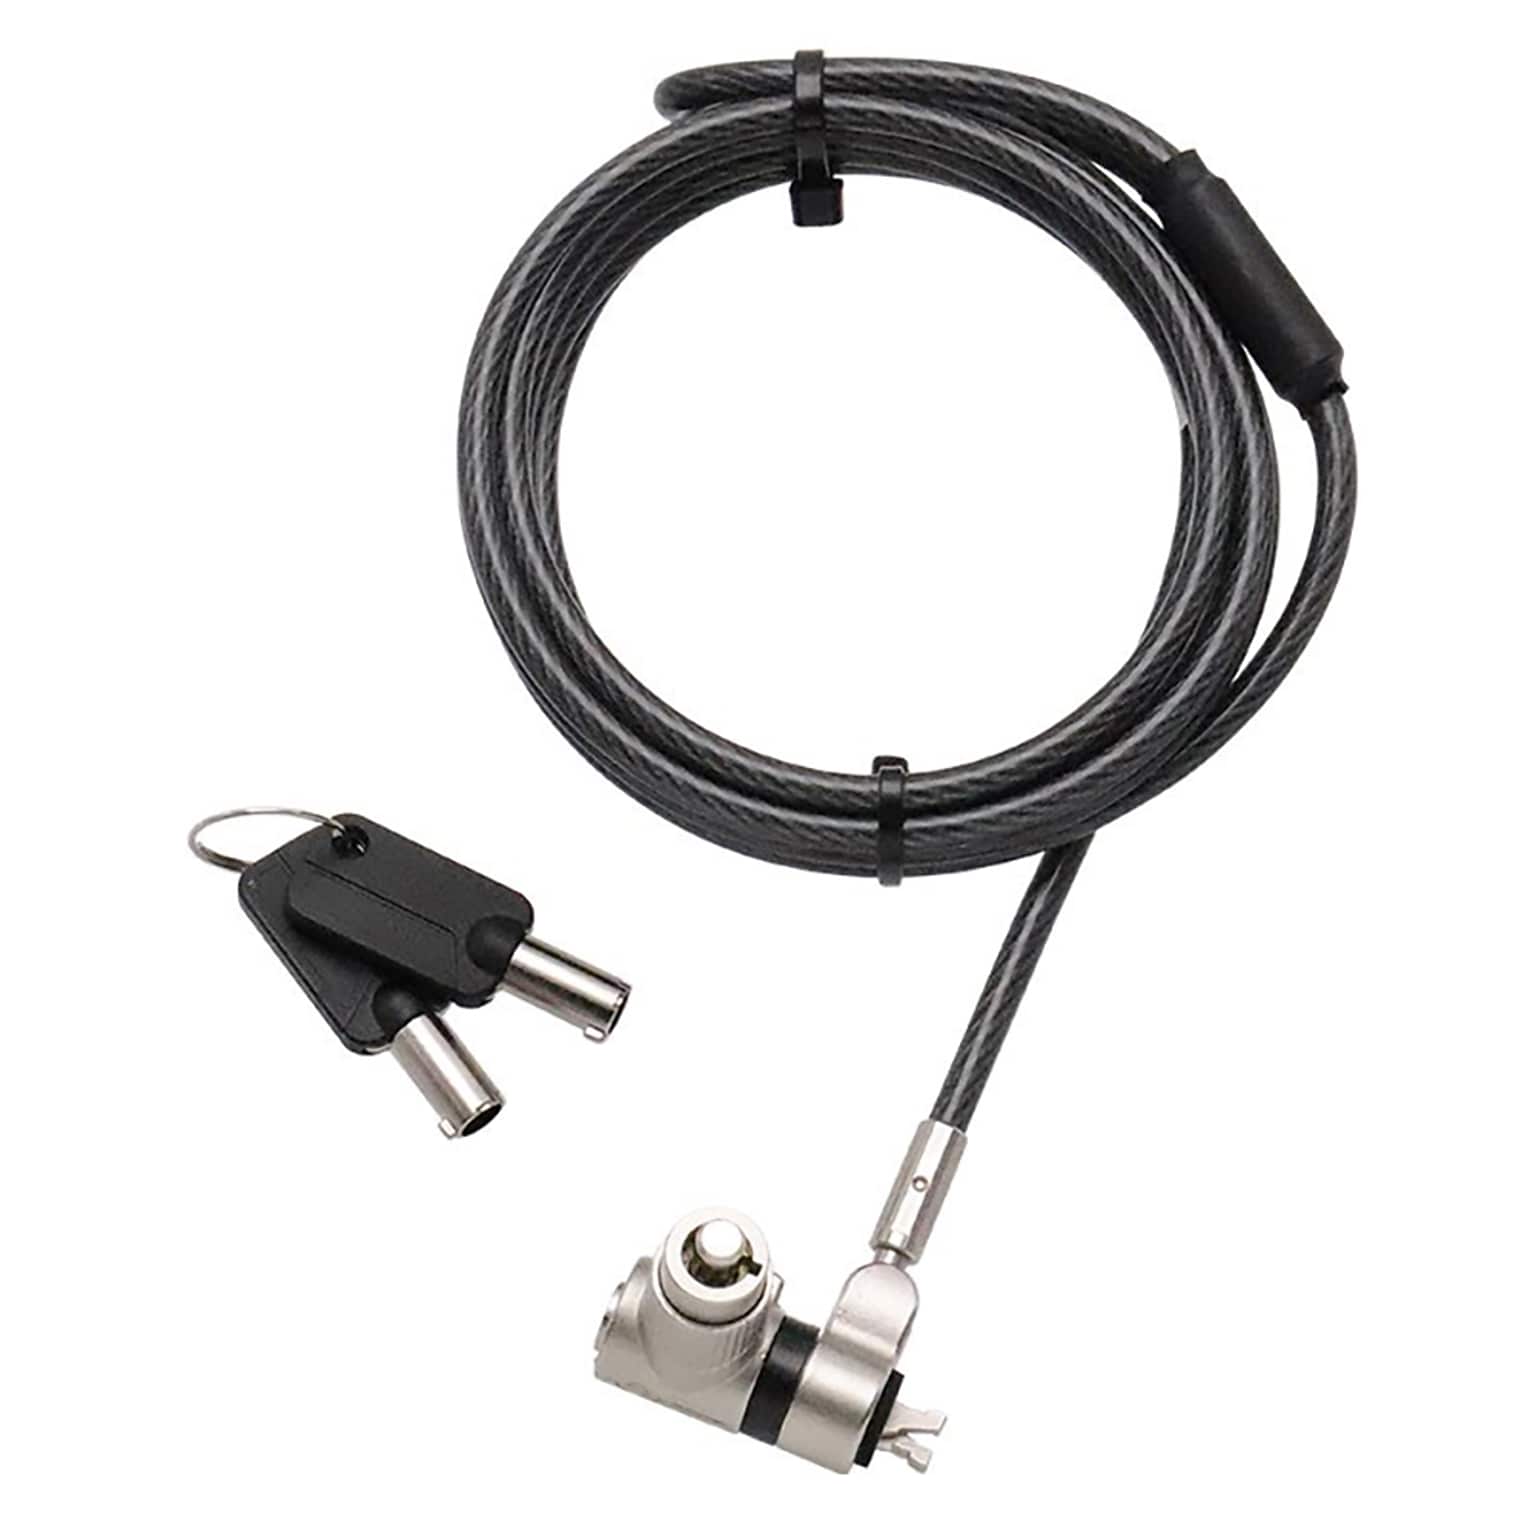 Mobile Edge Universal Ultra-Slim Laptop Security Cable Lock, 6.5 (MEAKL3)